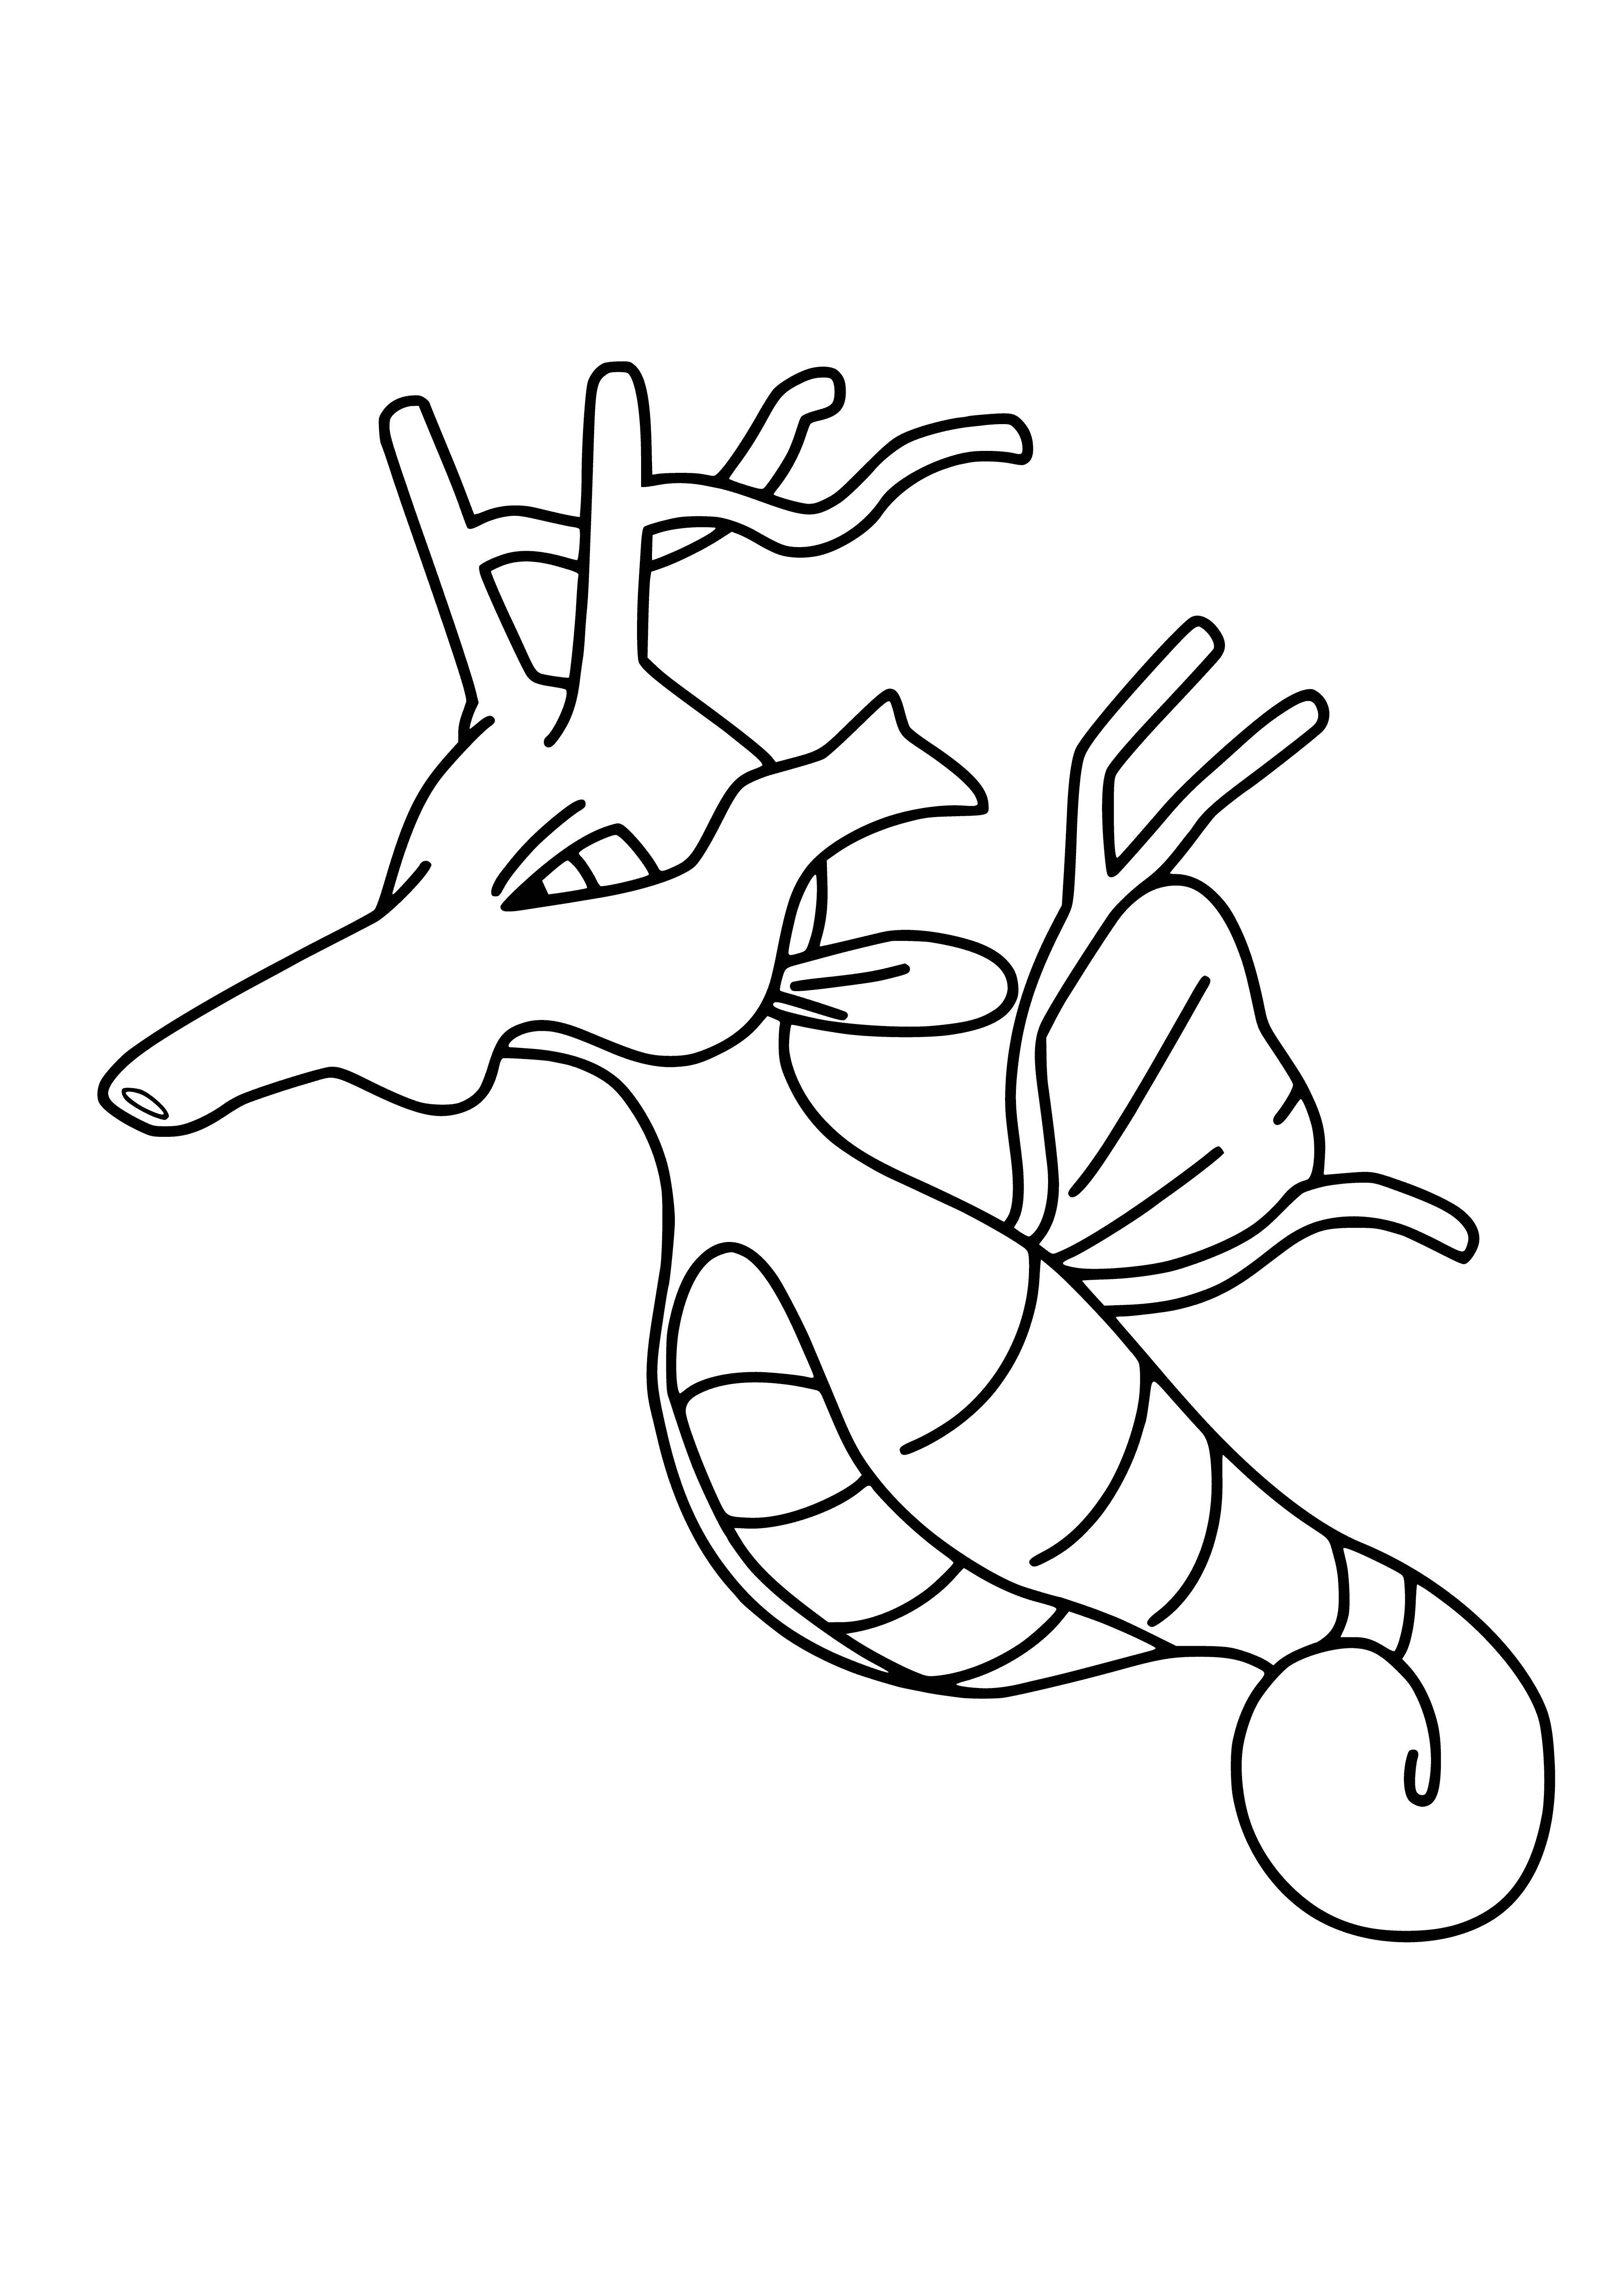 coloring page: Dragon Pokémon Kingdra evolves from Seadra, is blue & has a fin-crown & long neck. Fin-striped body helps it swim fast & strong.